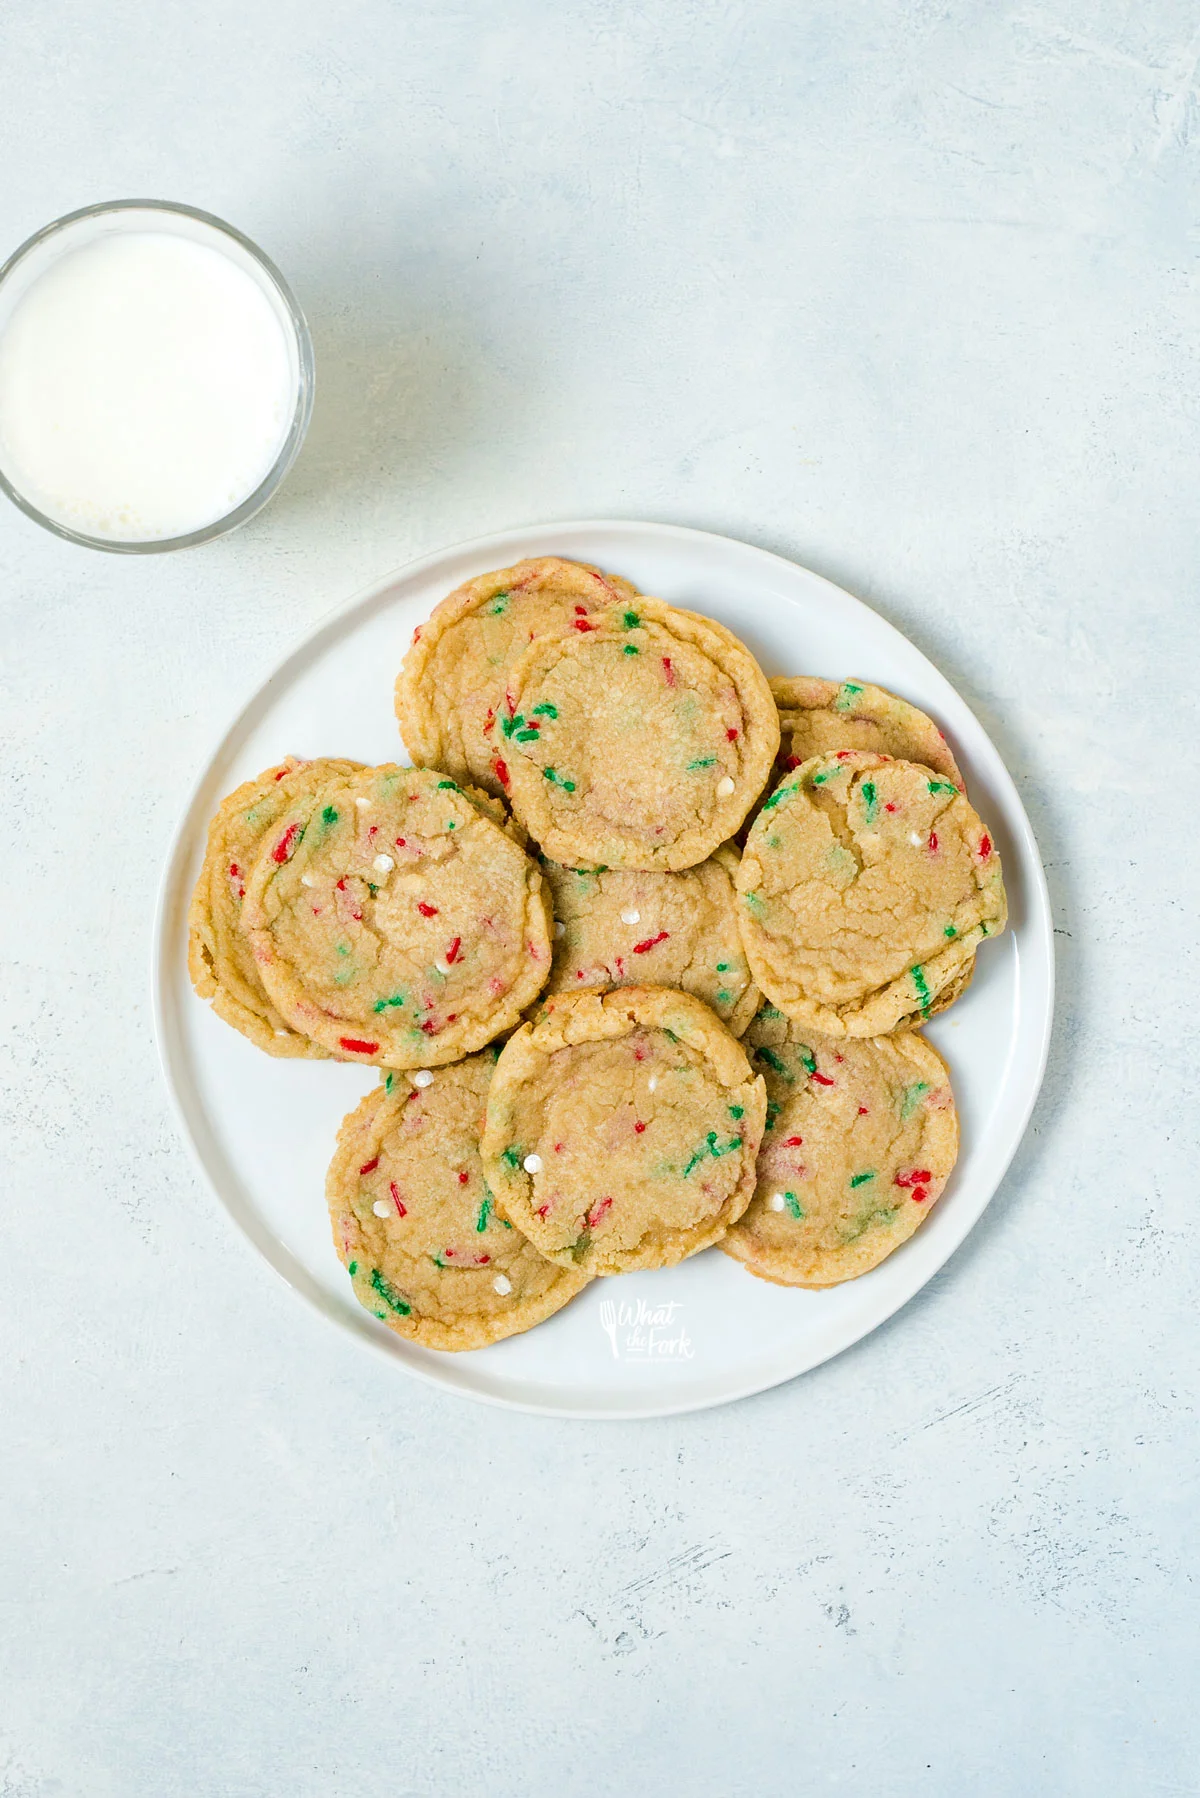 Chewy gluten free sugar cookies made with red and green Christmas sprinkles on a round white plate with a glass of milk next to it